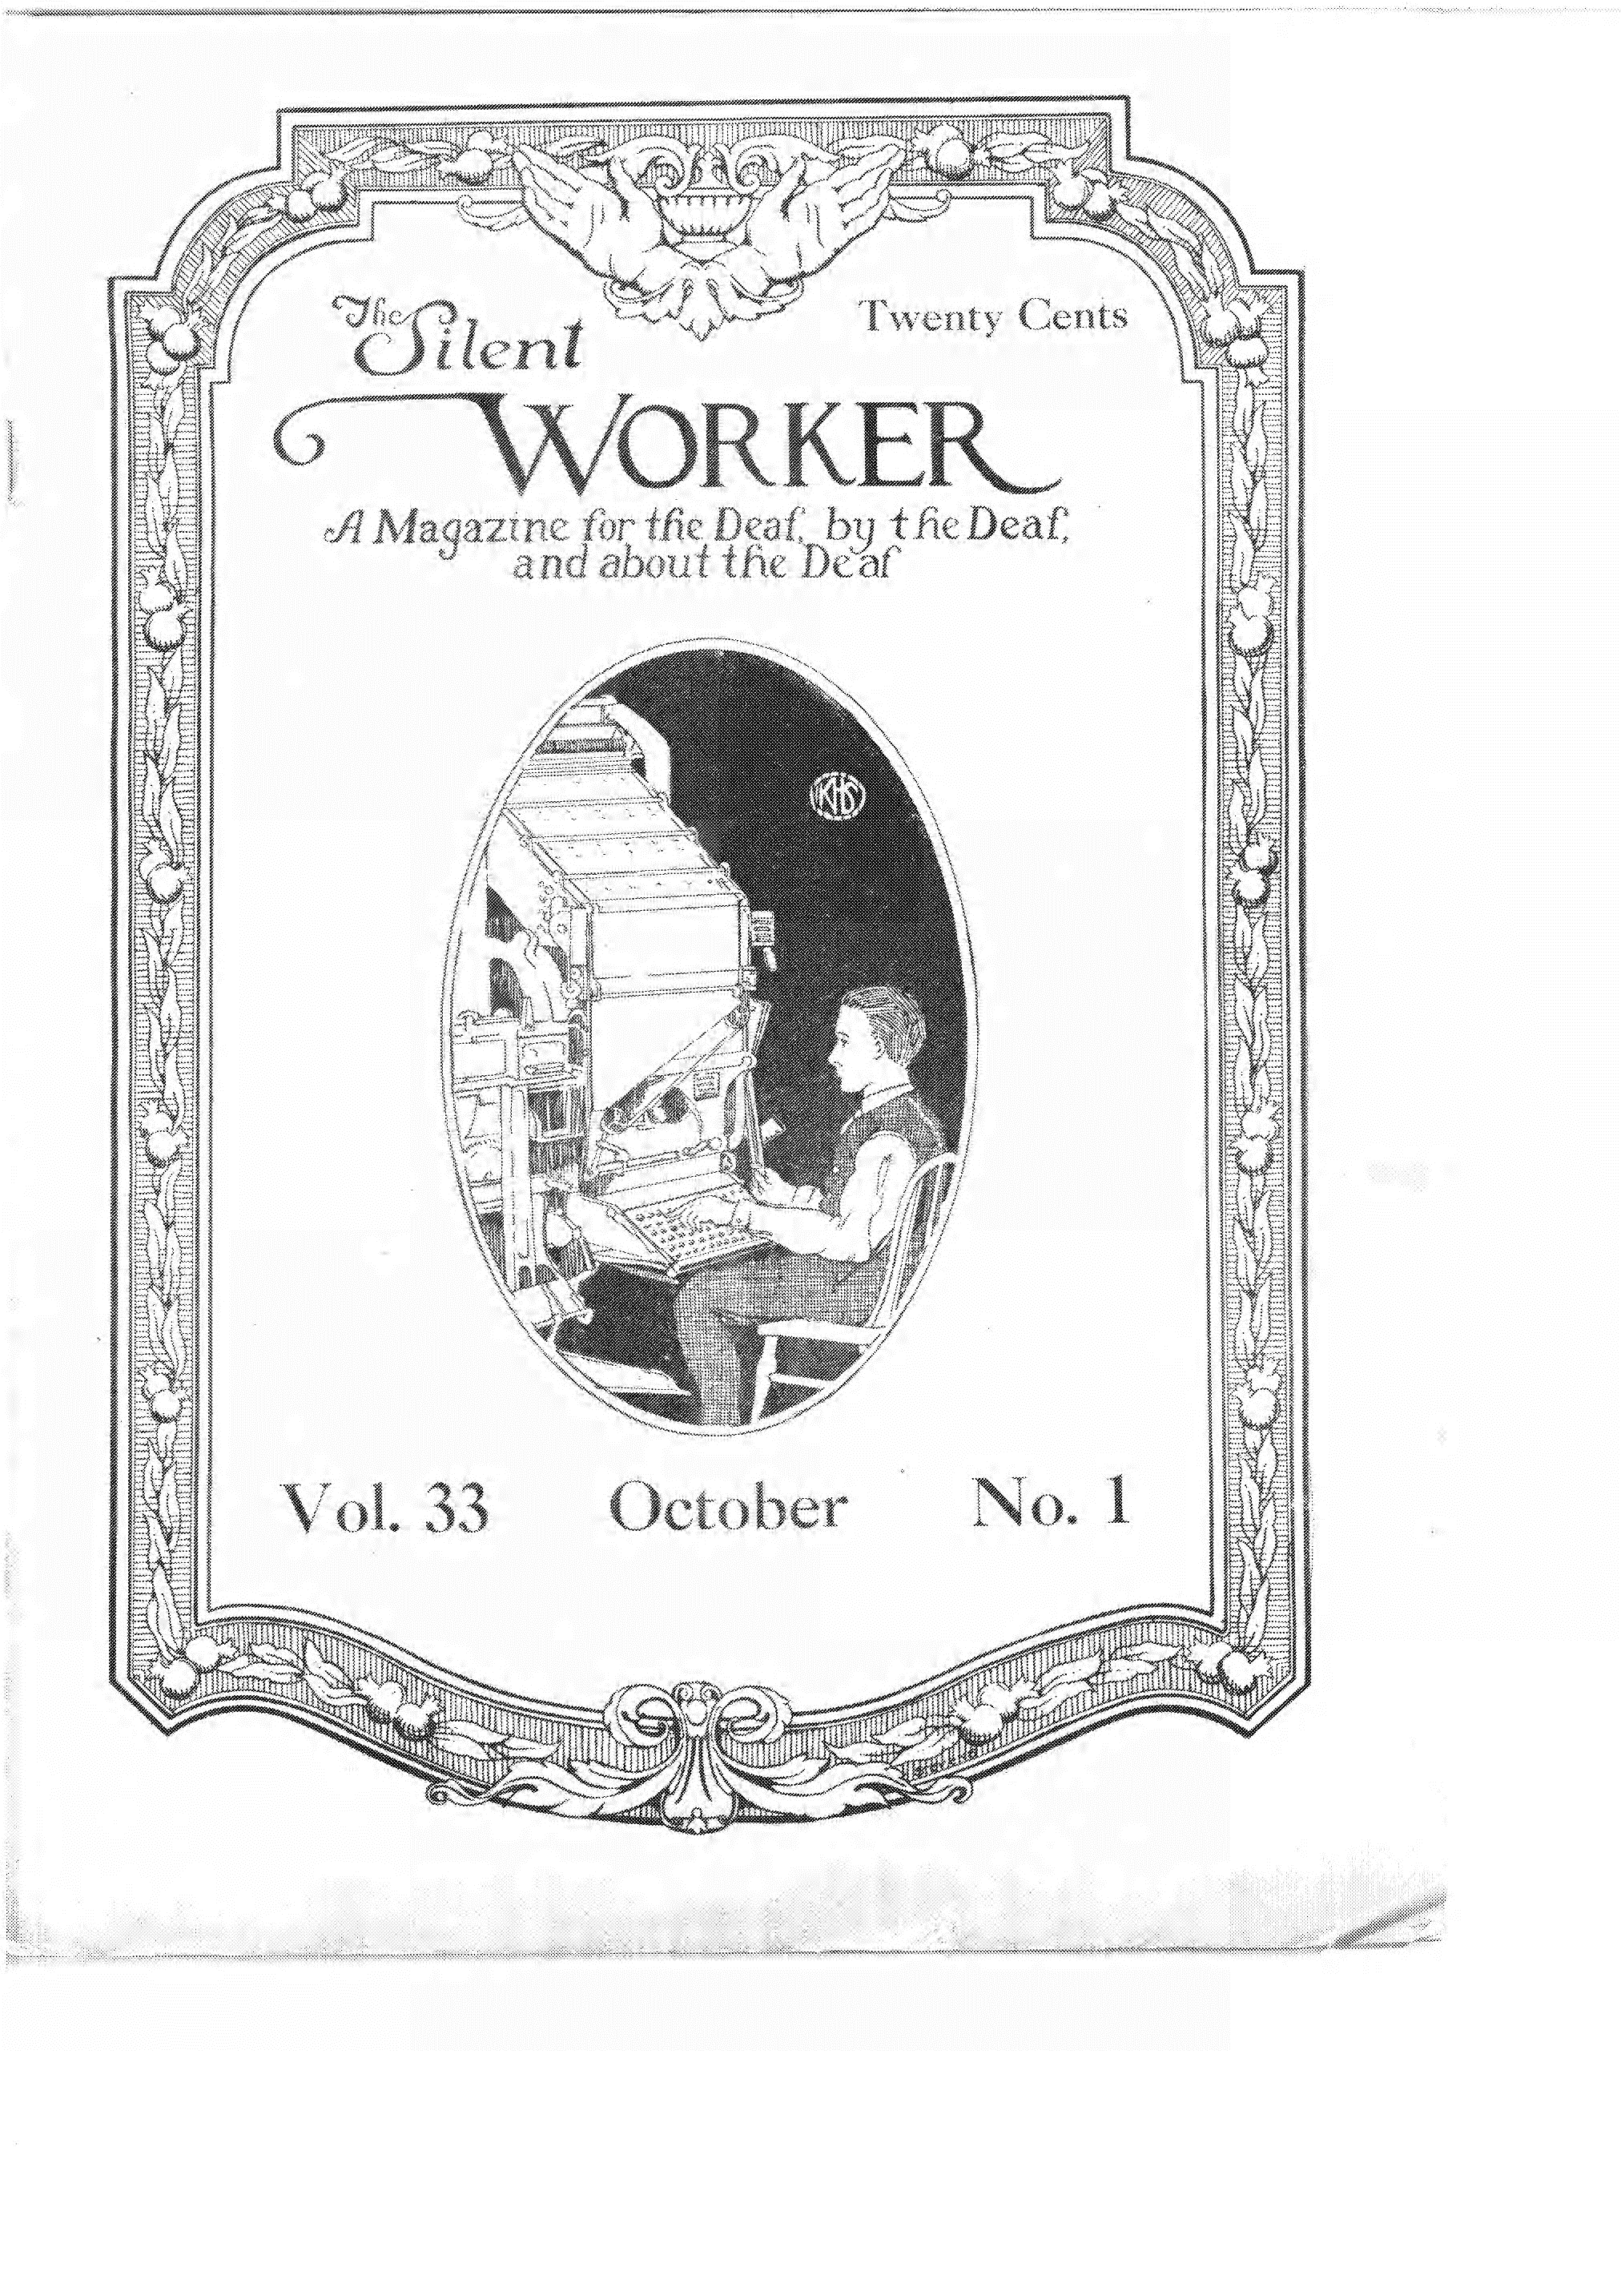 Periodical cover for the Silent Worker, showing a man sitting working on typesetting machinery, surrounded by issue information and an ornate border